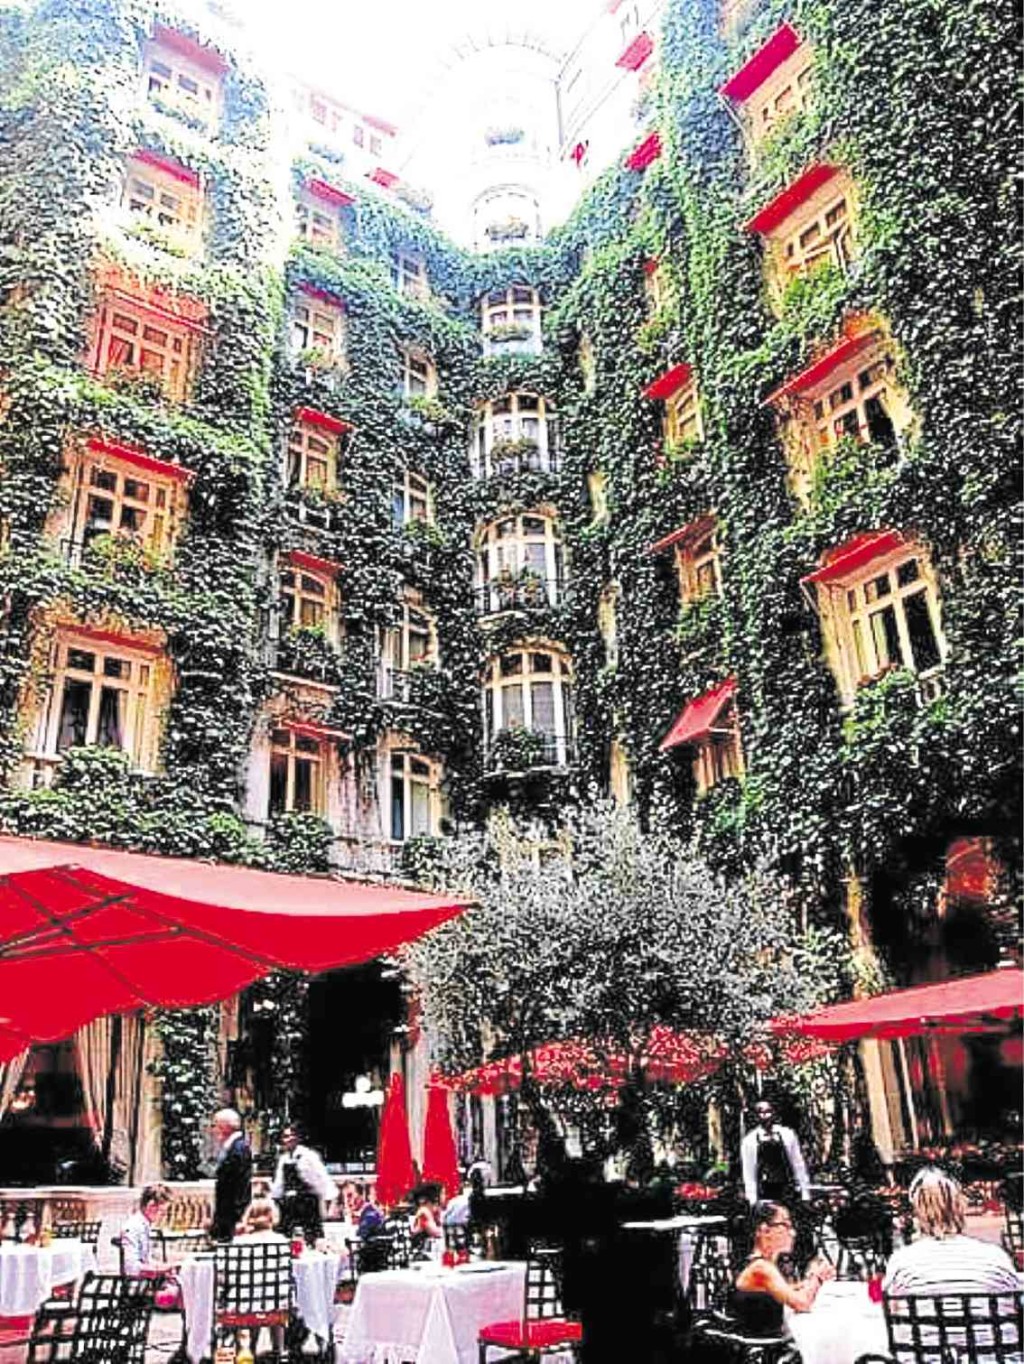 Le Cour Jardin at the Hotel Plaza Athenee.